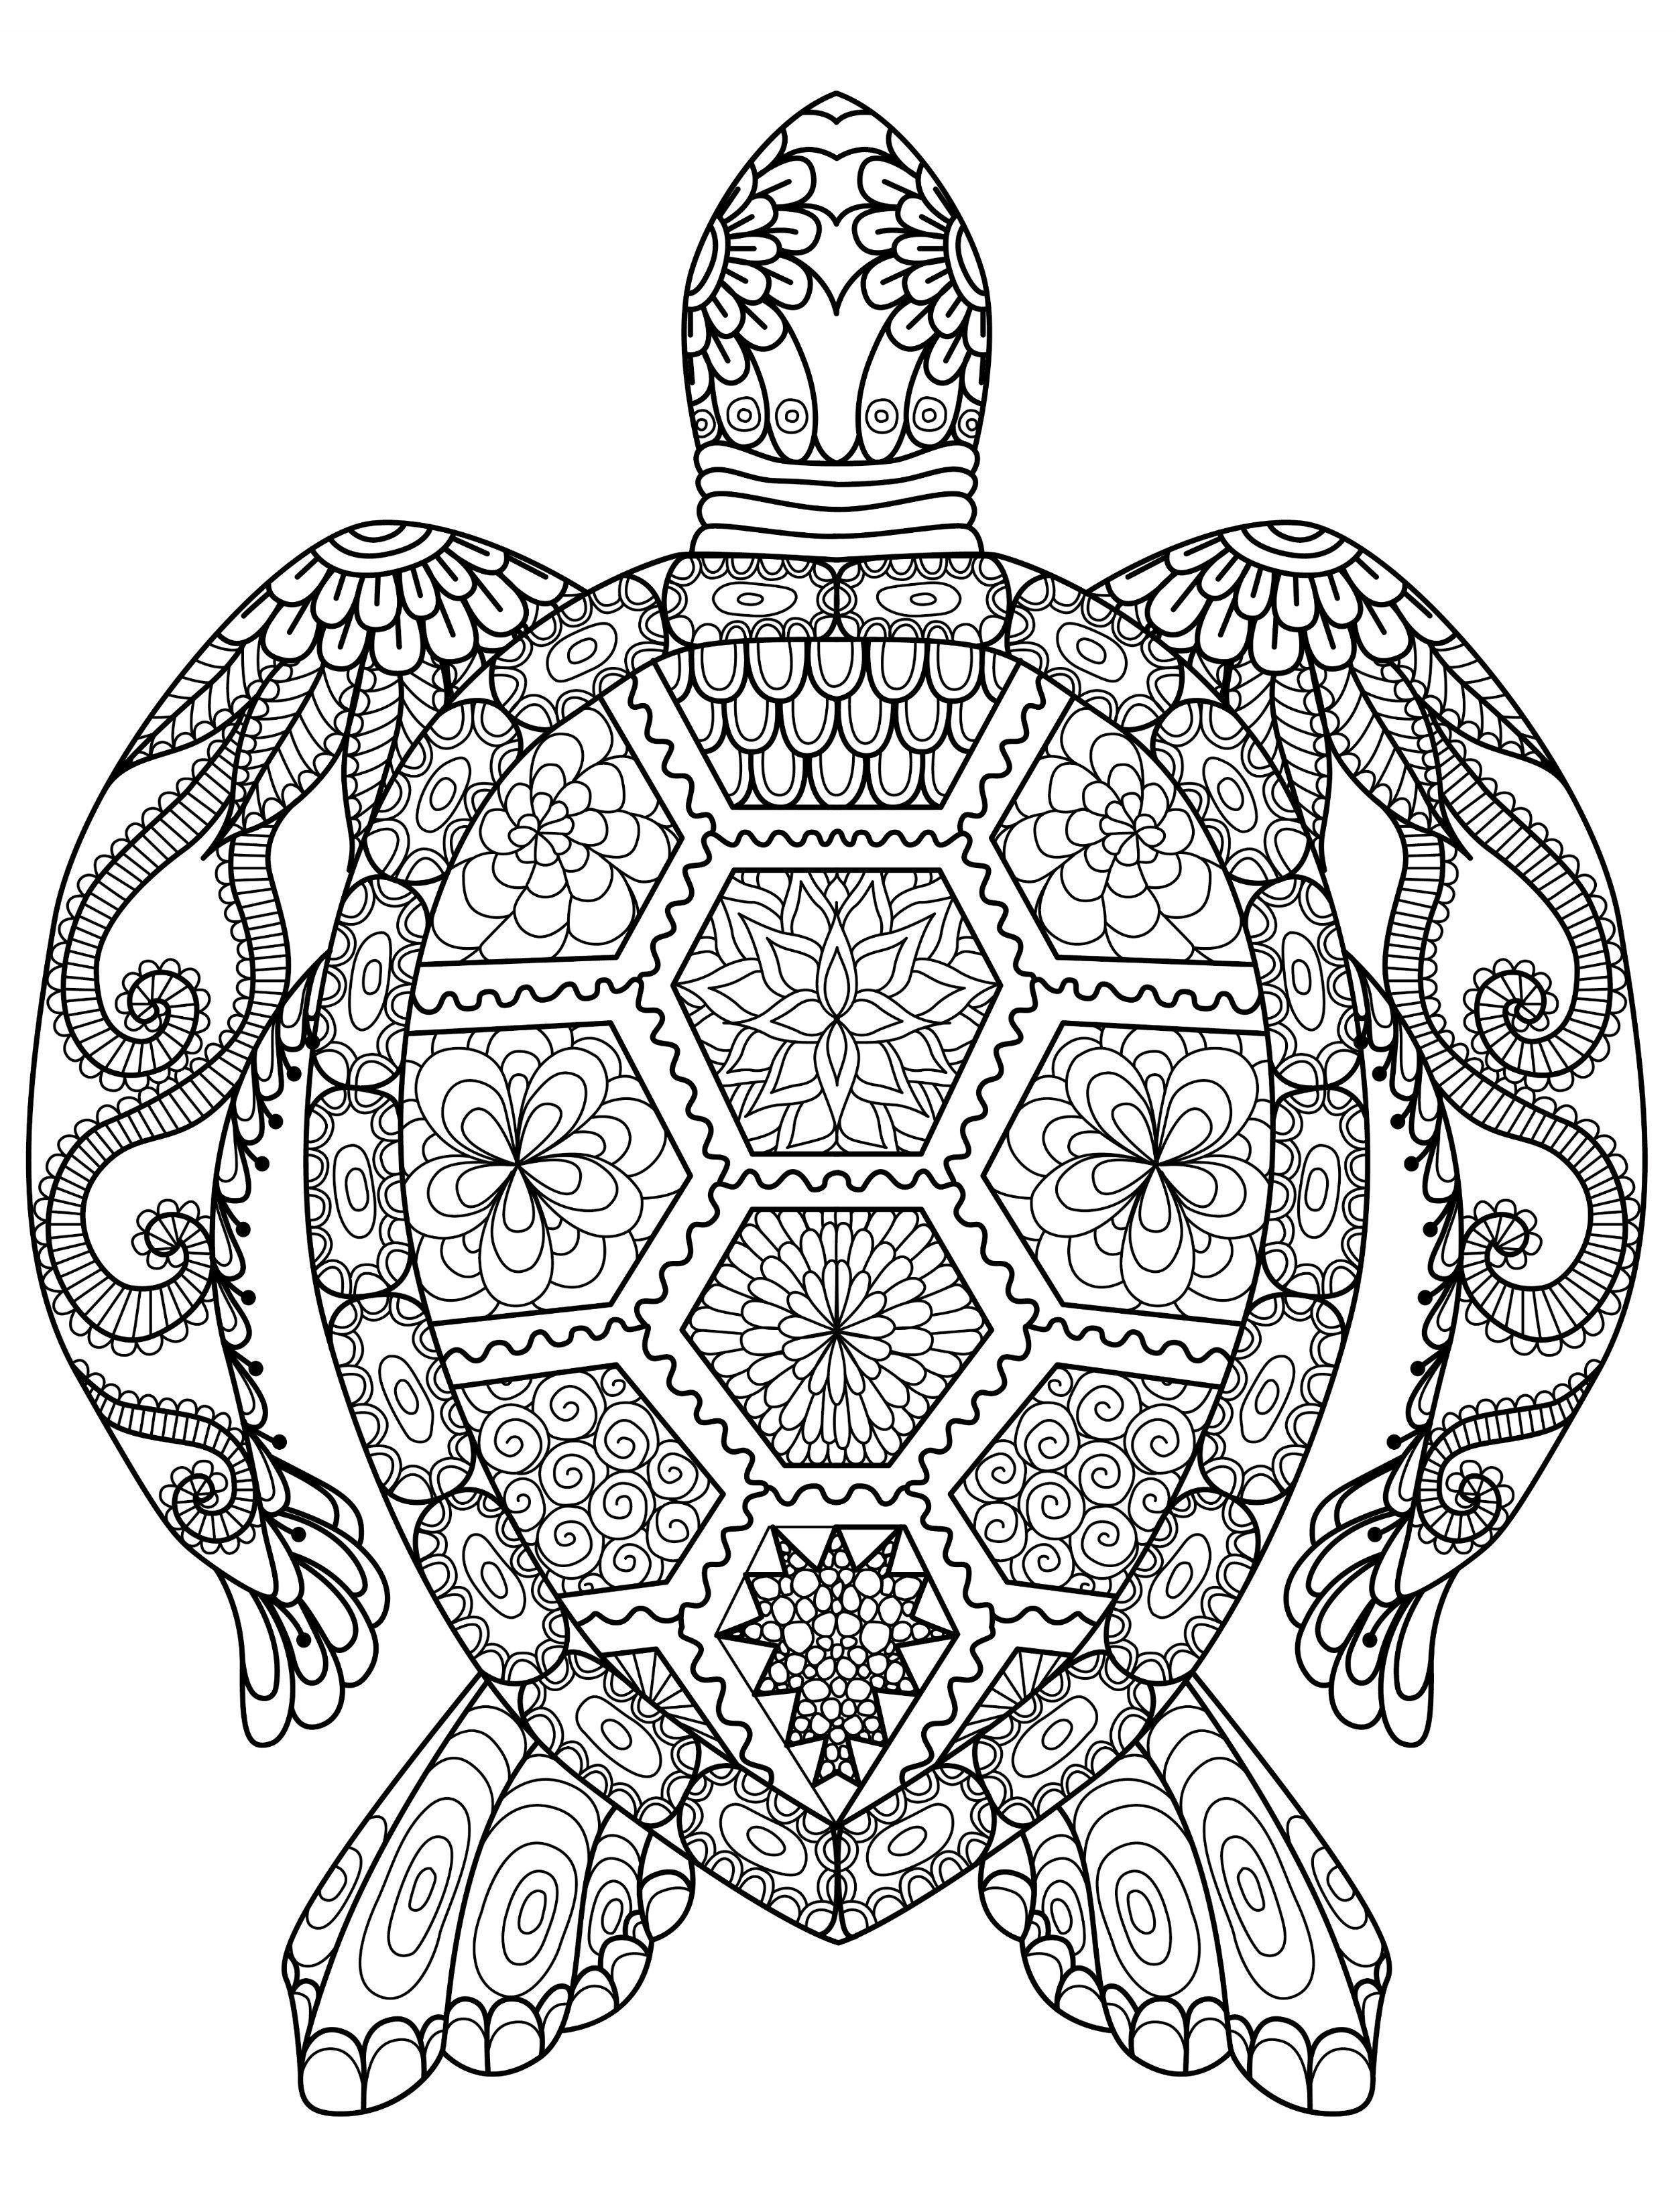 Mandala Animals Coloring Pages   Coloring Home